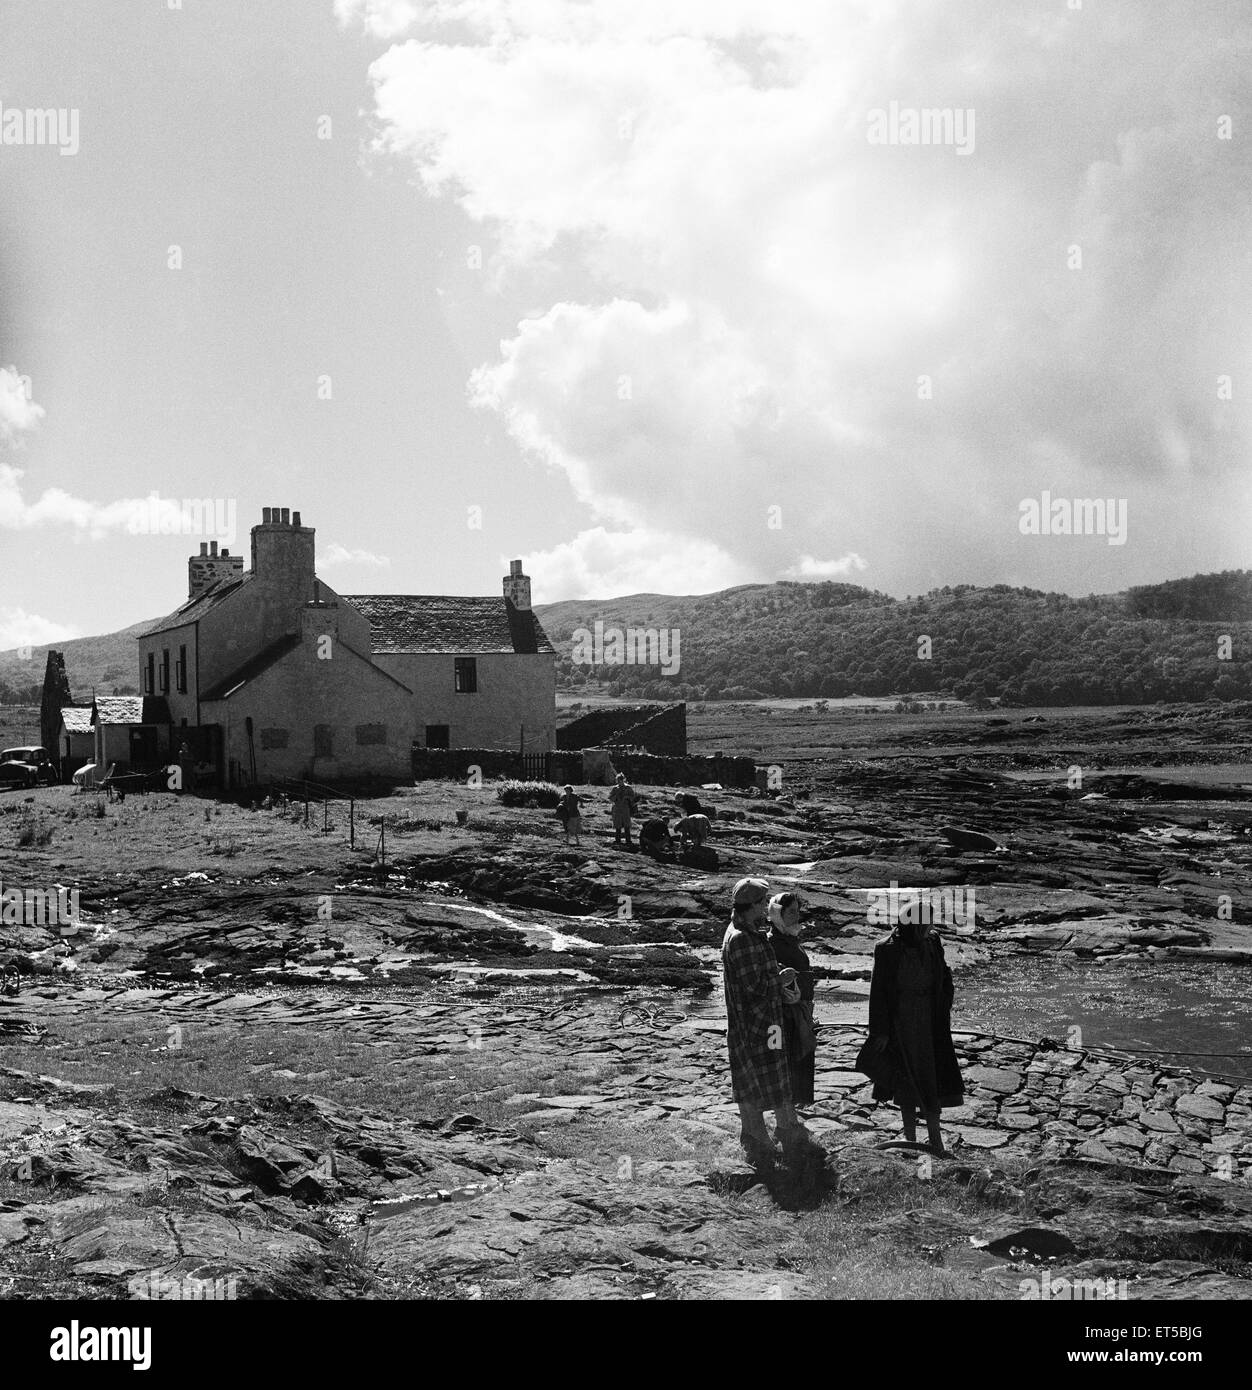 Point d'herbe, Isle of Mull, Argyll and Bute, Ecosse. 23 août 1951 L'herbe.Point, Isle of Mull, Argyll and Bute, Ecosse. 23 août 1951. Banque D'Images